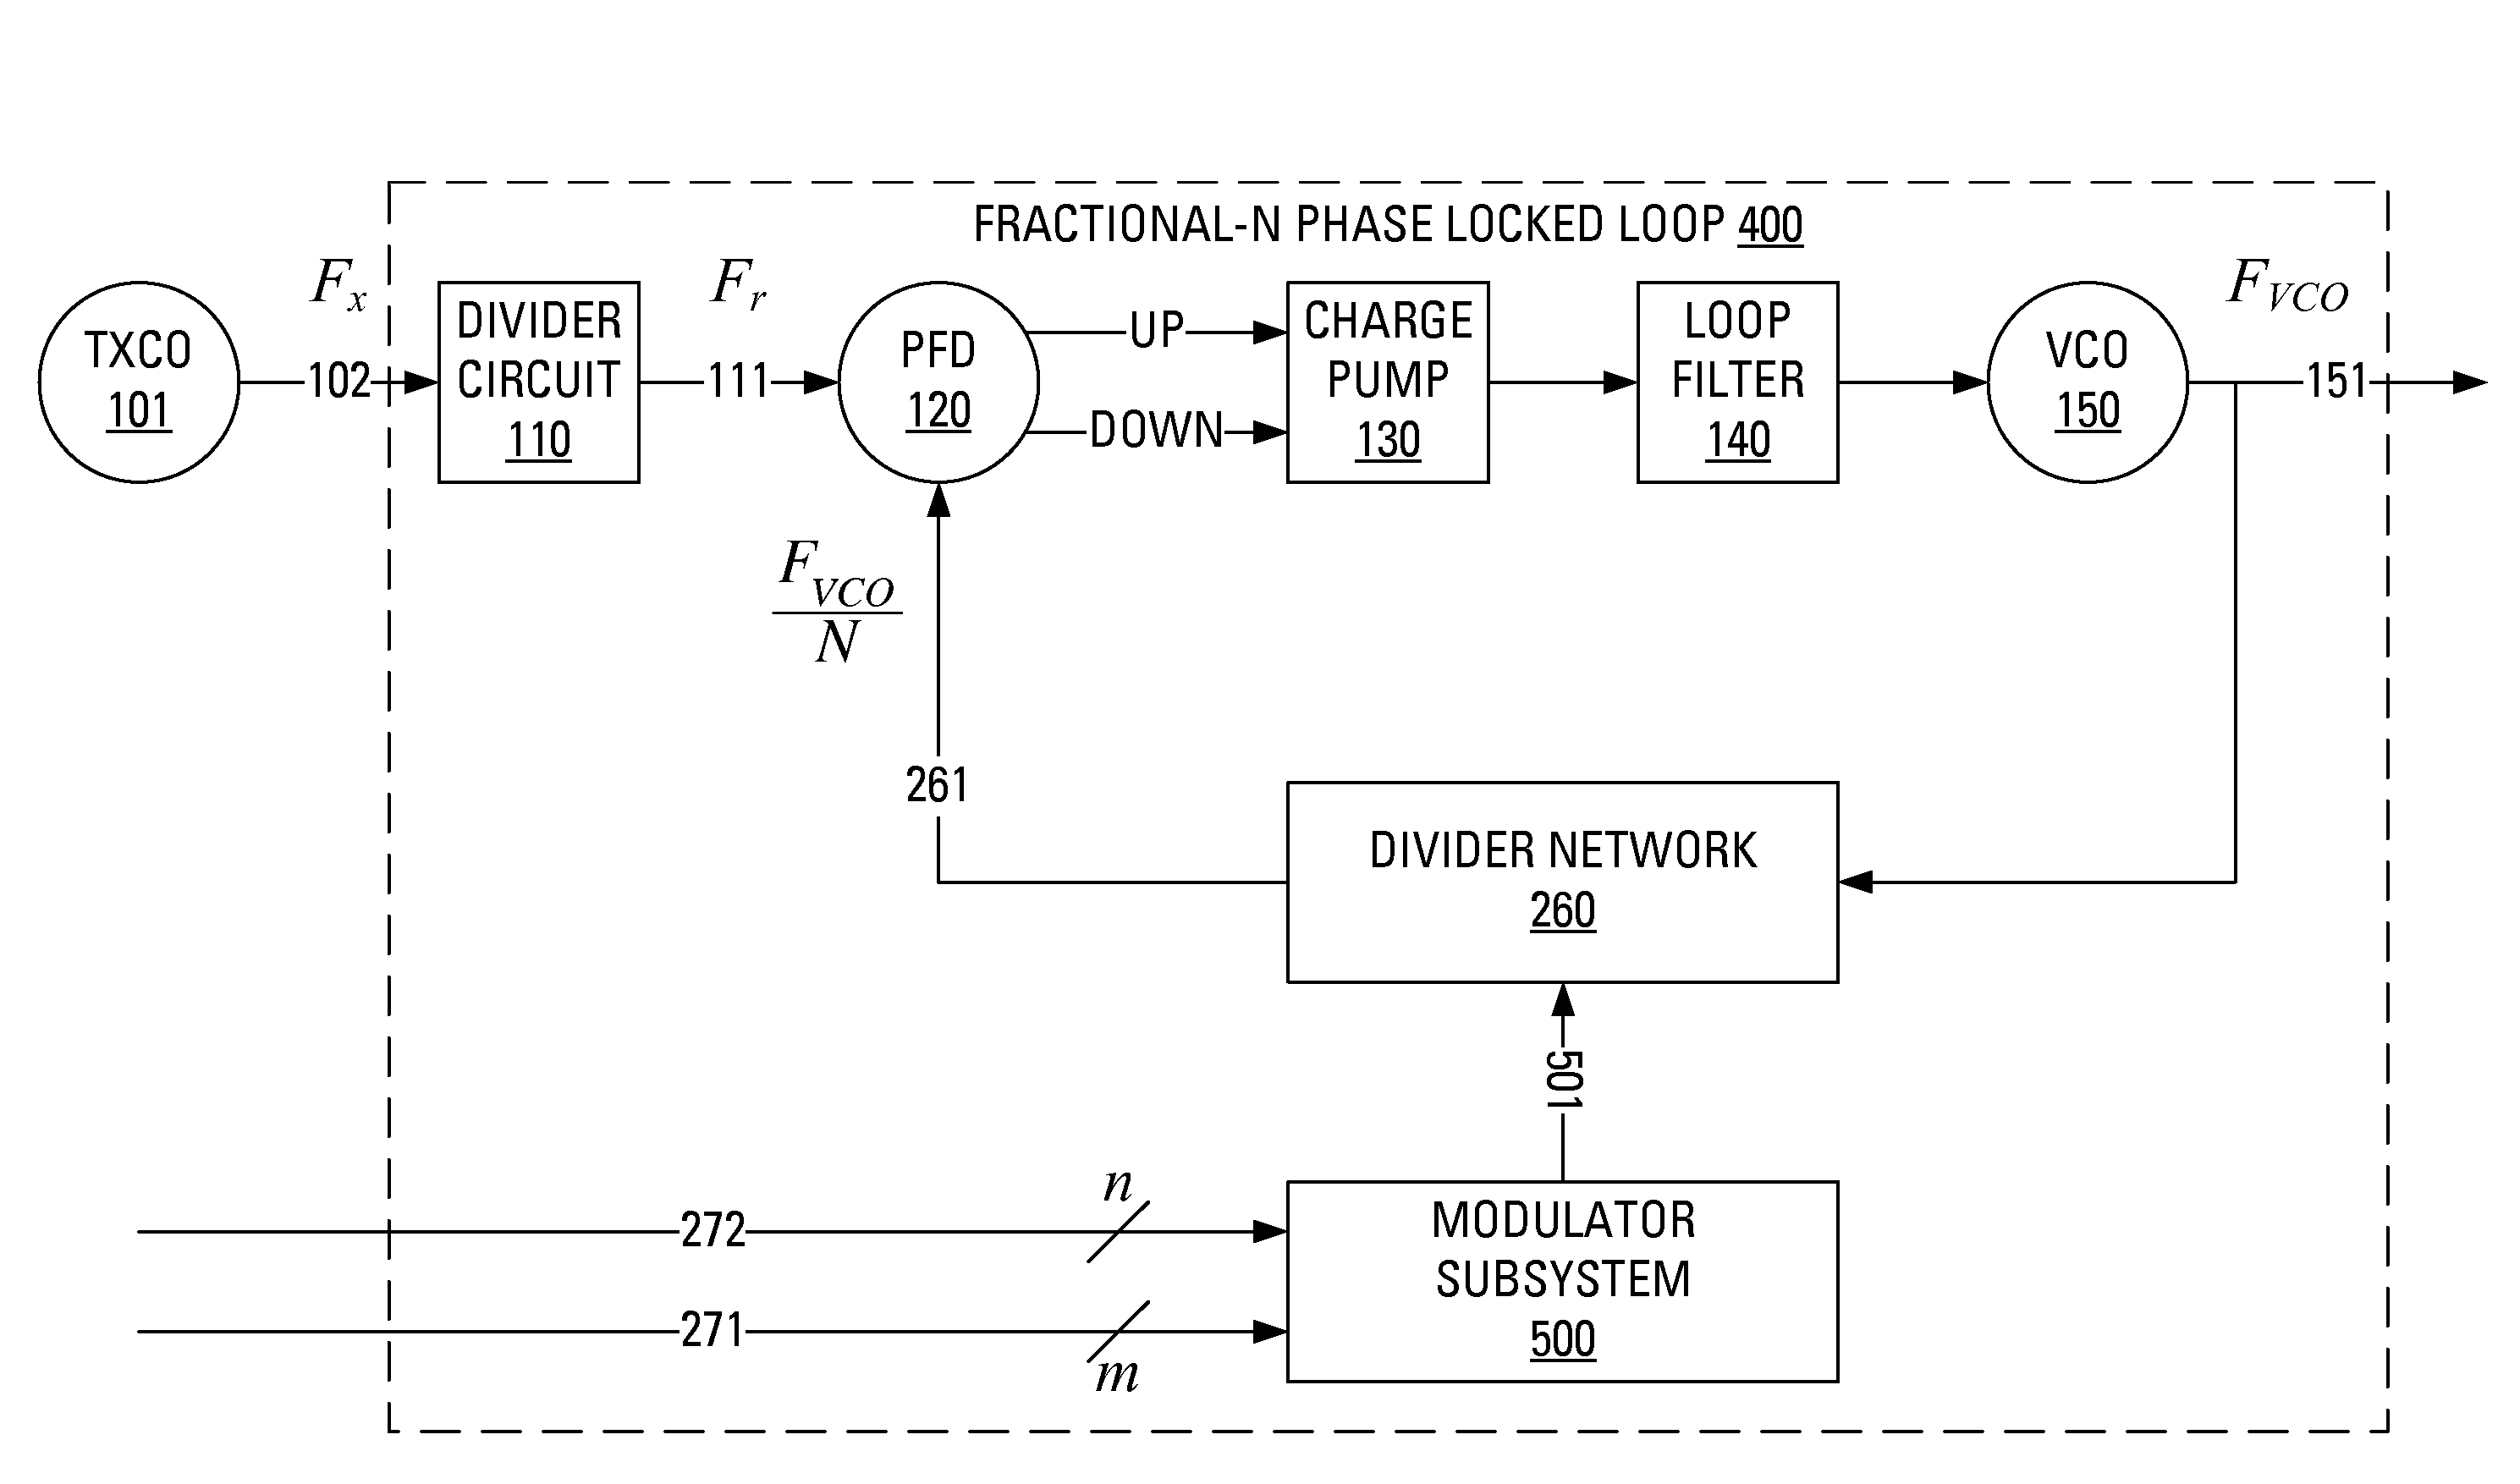 Circuit and method for glitch correction